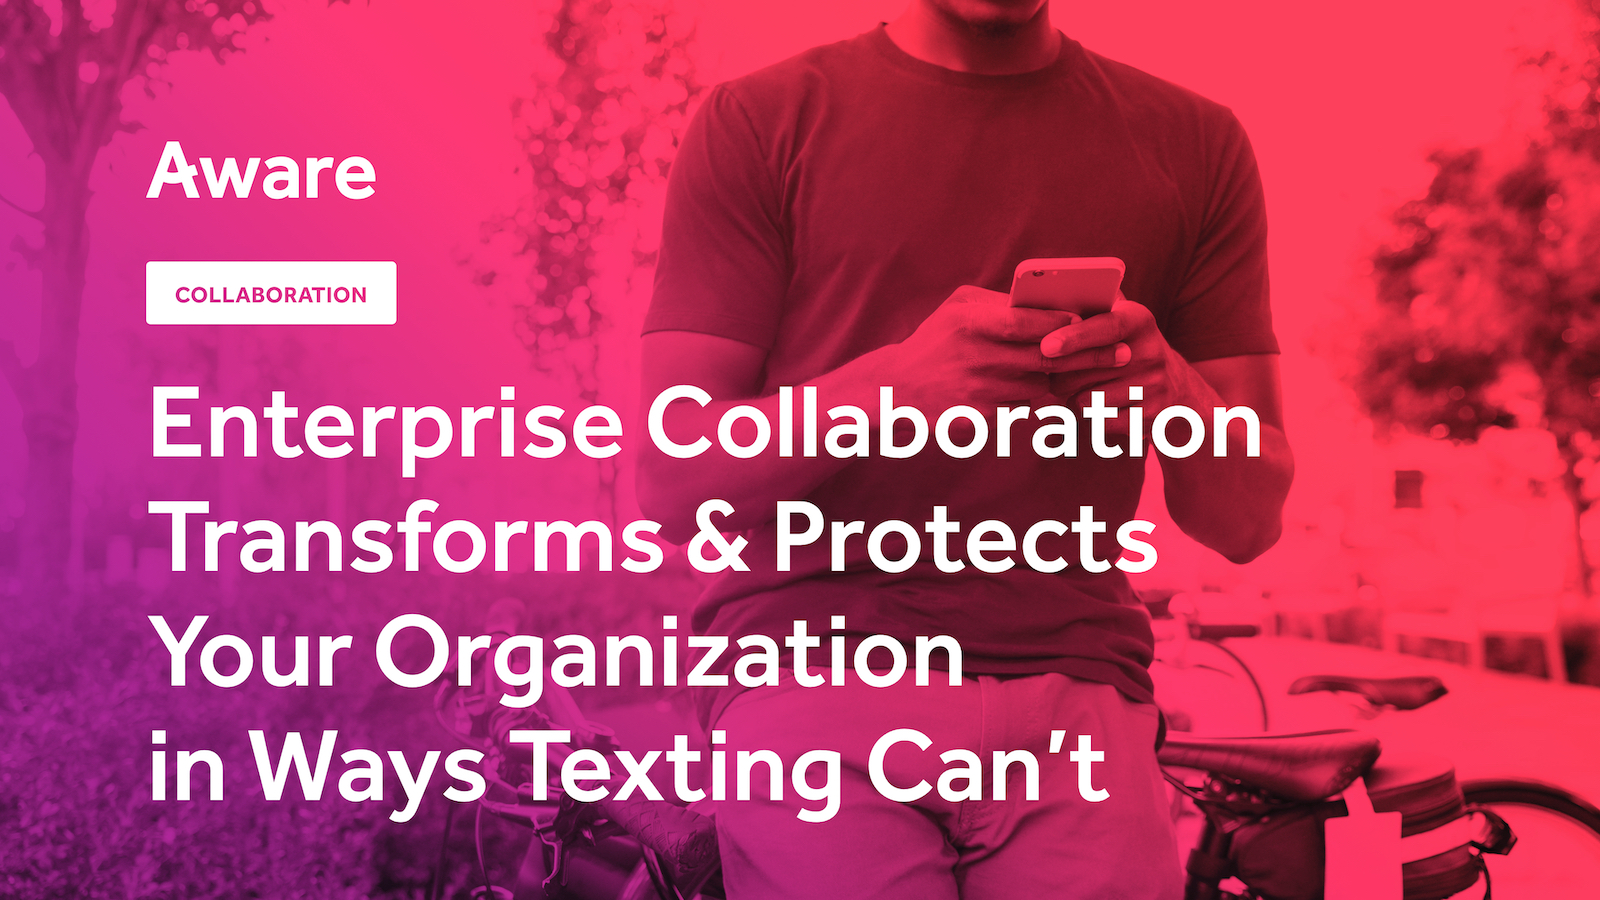 Enterprise Collaboration Transforms & Protects Your Organization in Ways Texting Can’t